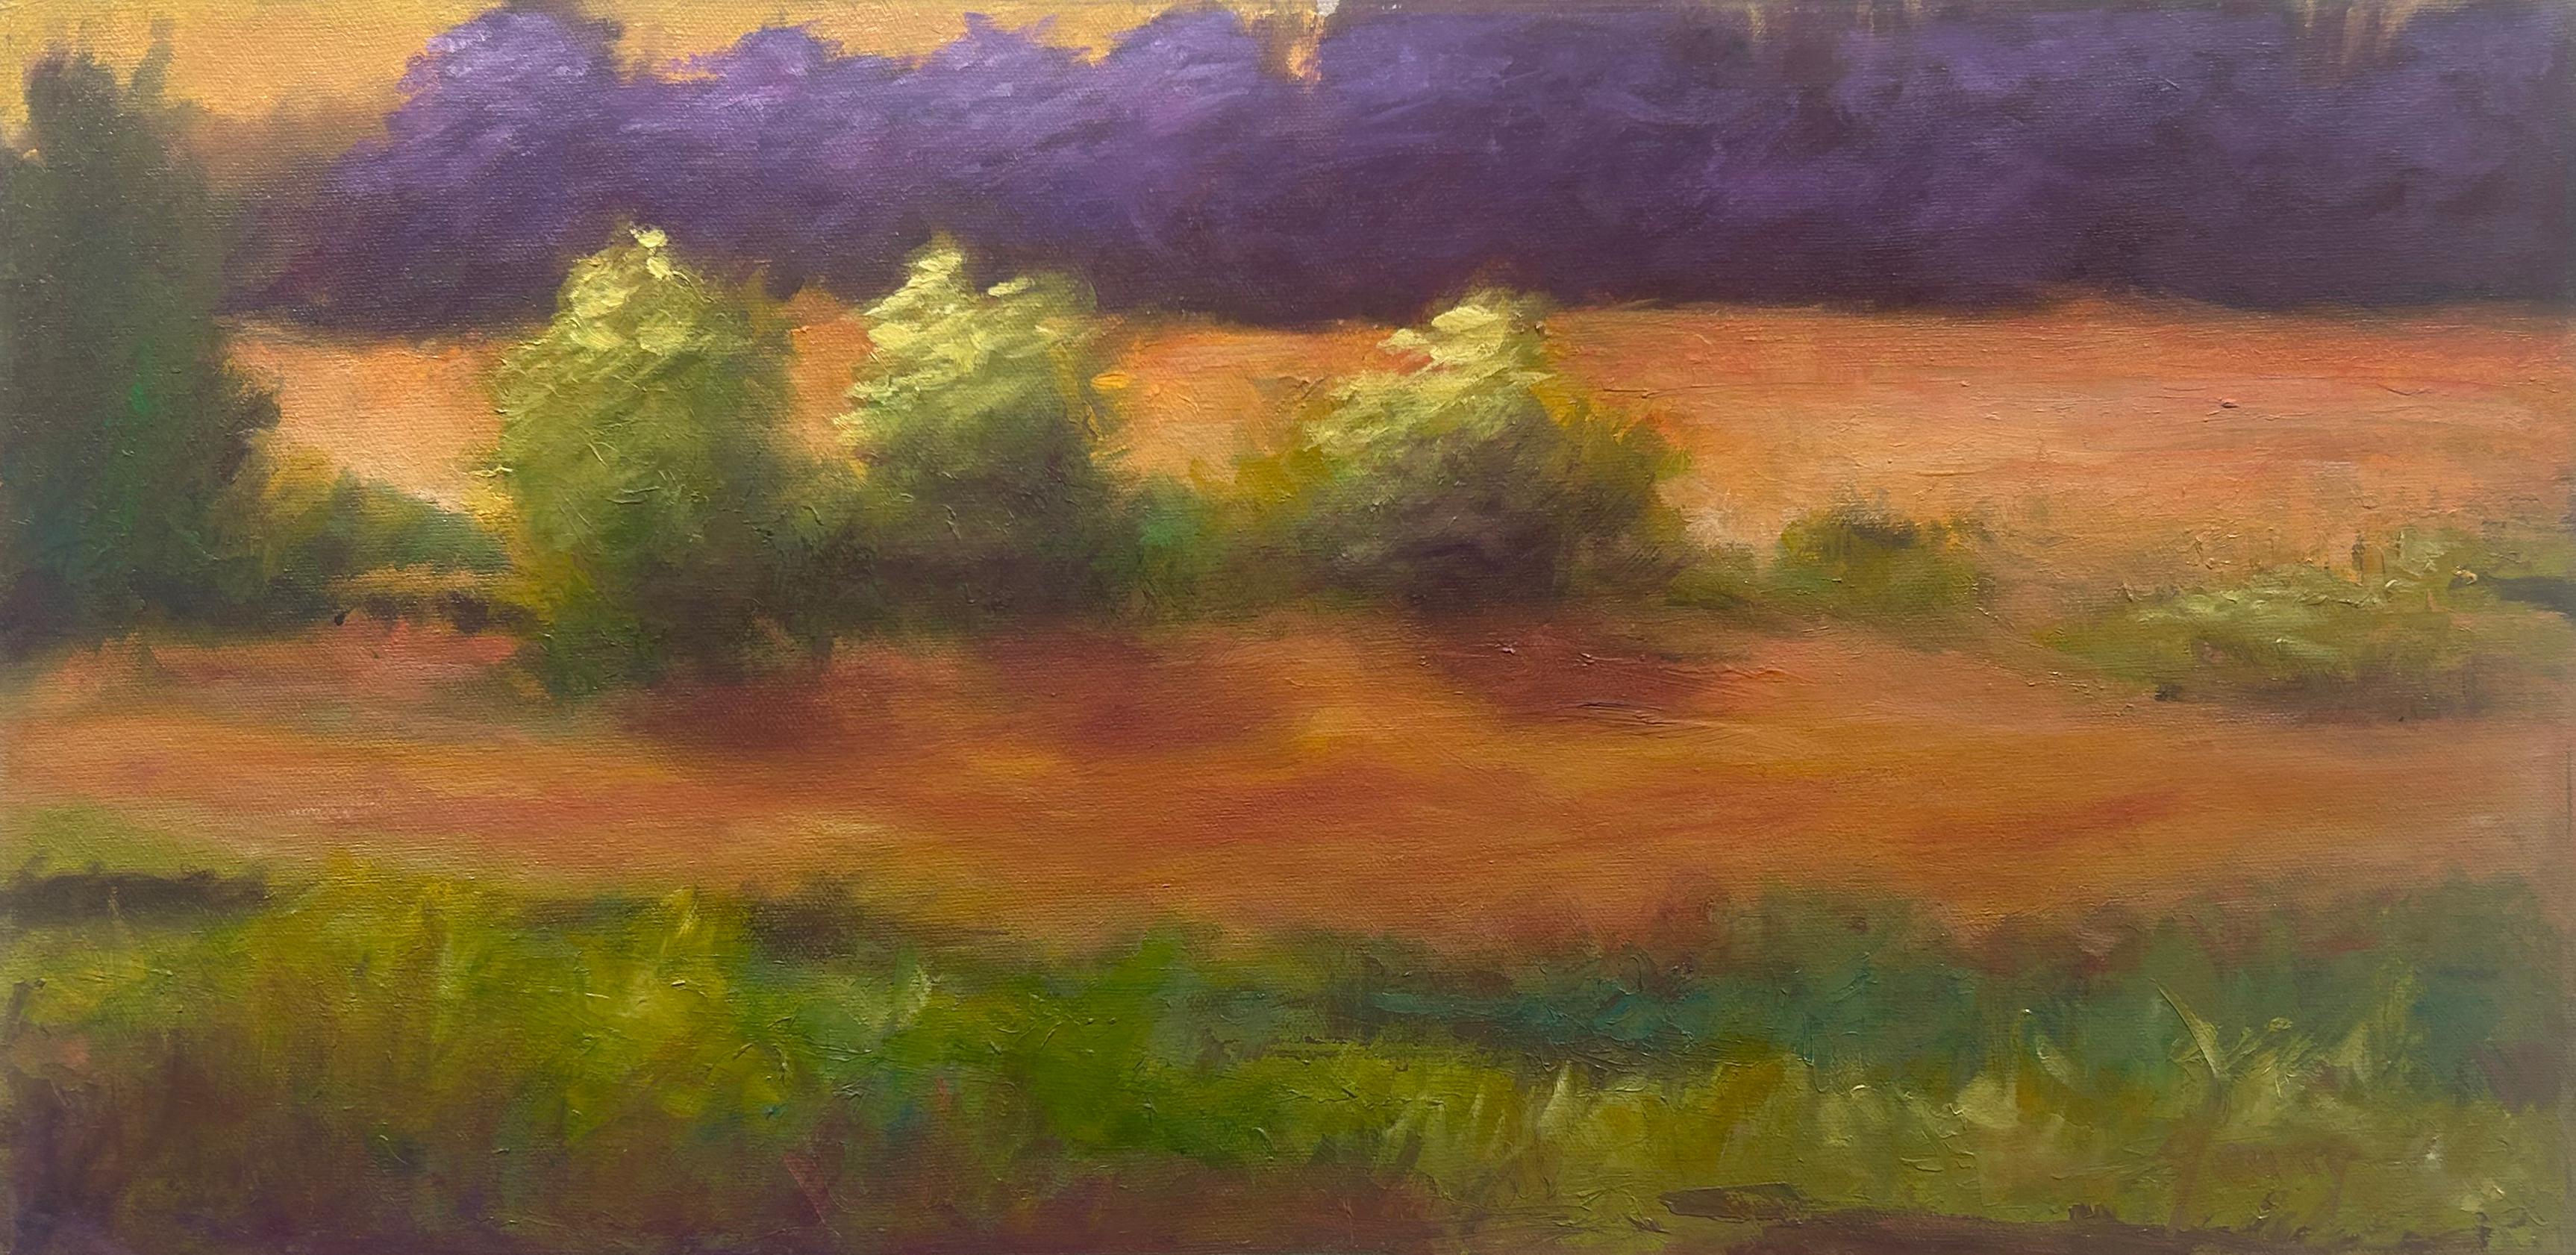 "The Order of Things" 12x24 is an oil painting on canvas by artist Laurence Young. Featured is a warm sunny impressionistic landscape. Rows of purple hued trees line the high horizon to add a bright contrast to the overall warm yellow and orange of